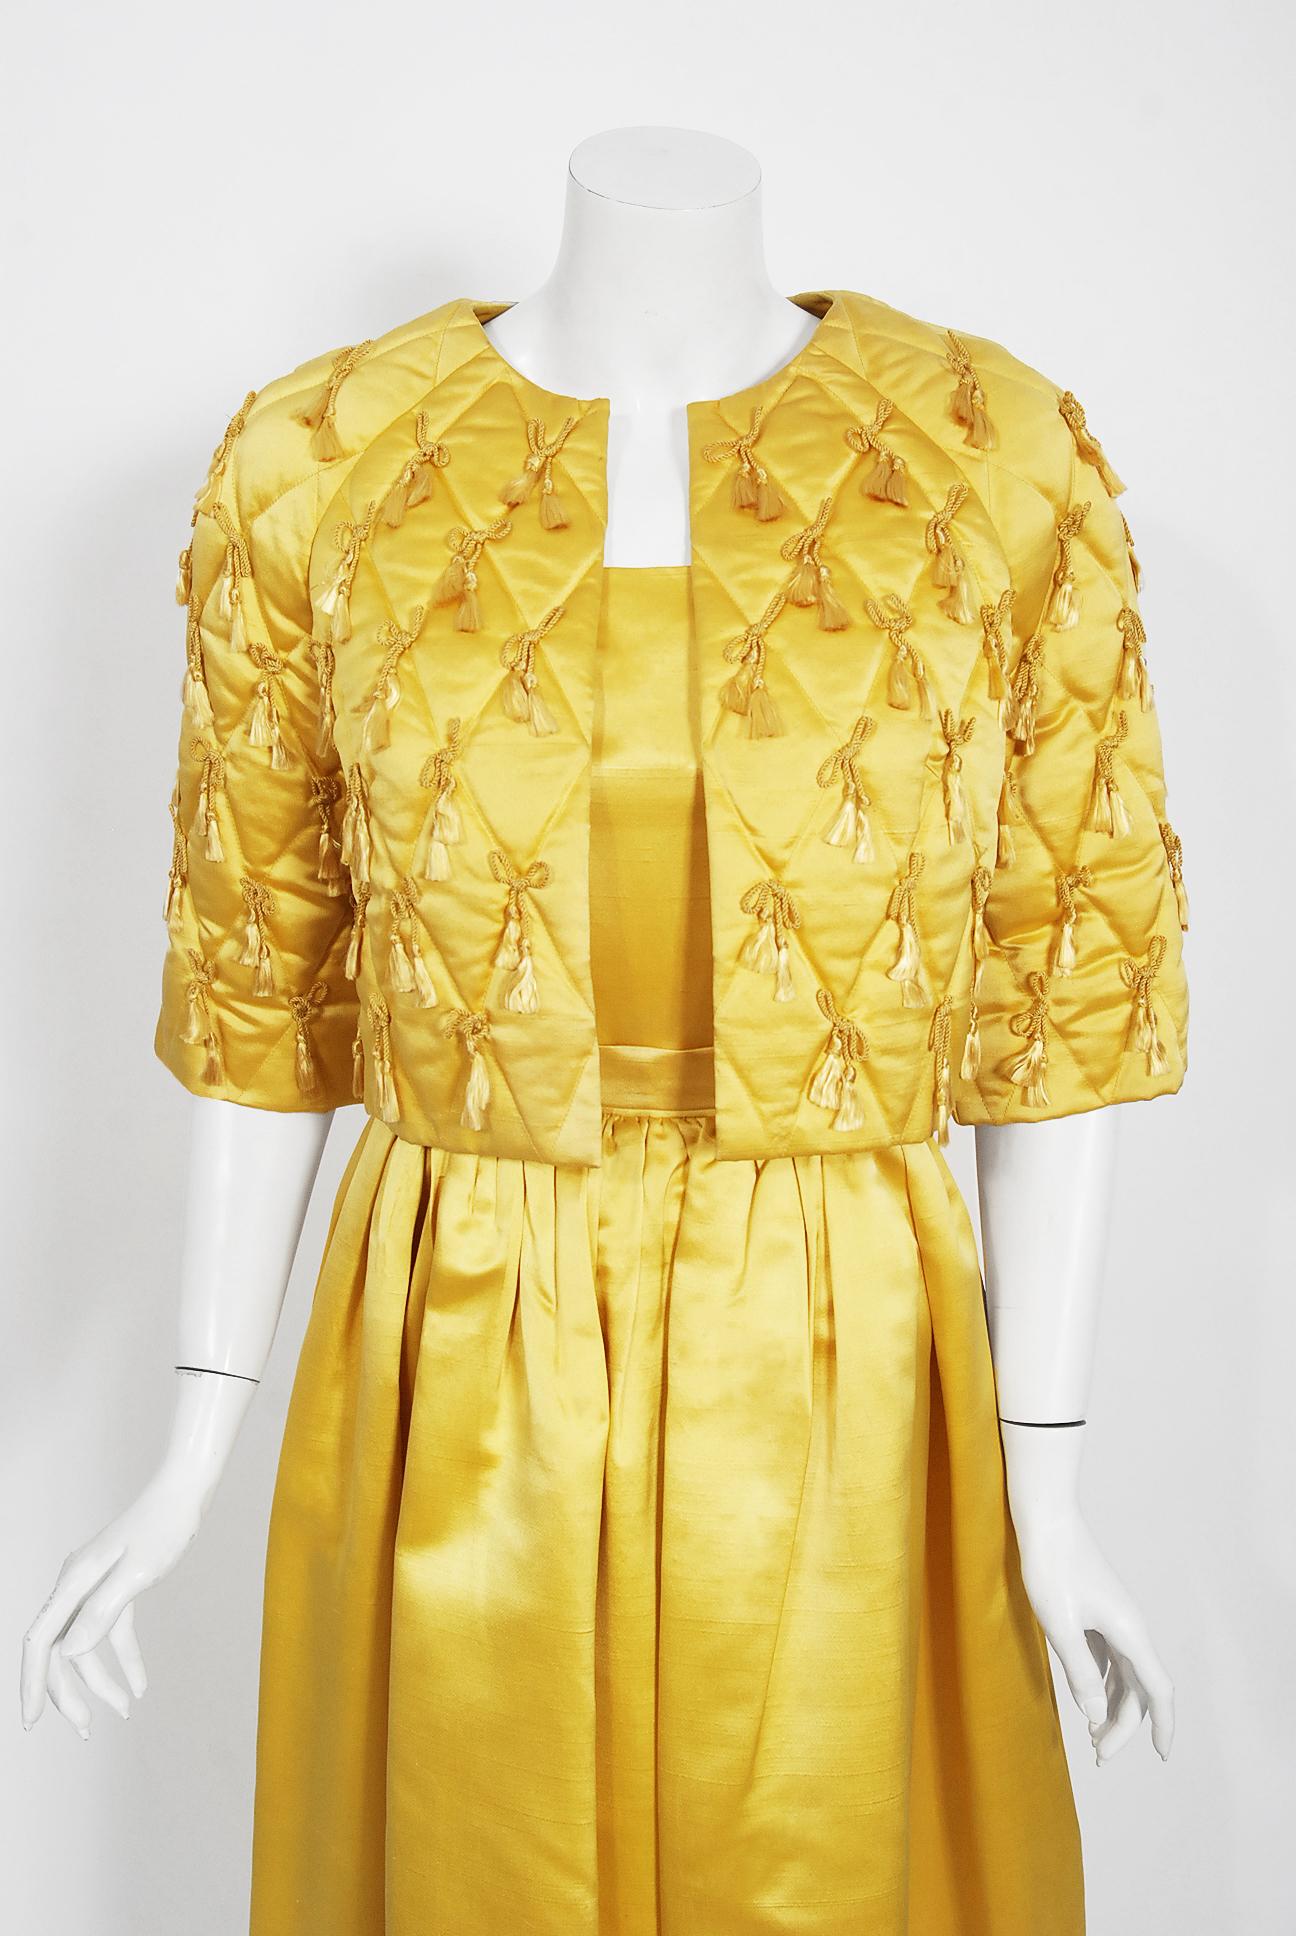 In this gorgeous Jane Derby designer ensemble, the detailed construction and meticulous attention to detail are comparable to what you will find in modern couture. Jane Derby was known as a high-end New York boutique, opening in 1936. In 1965, the